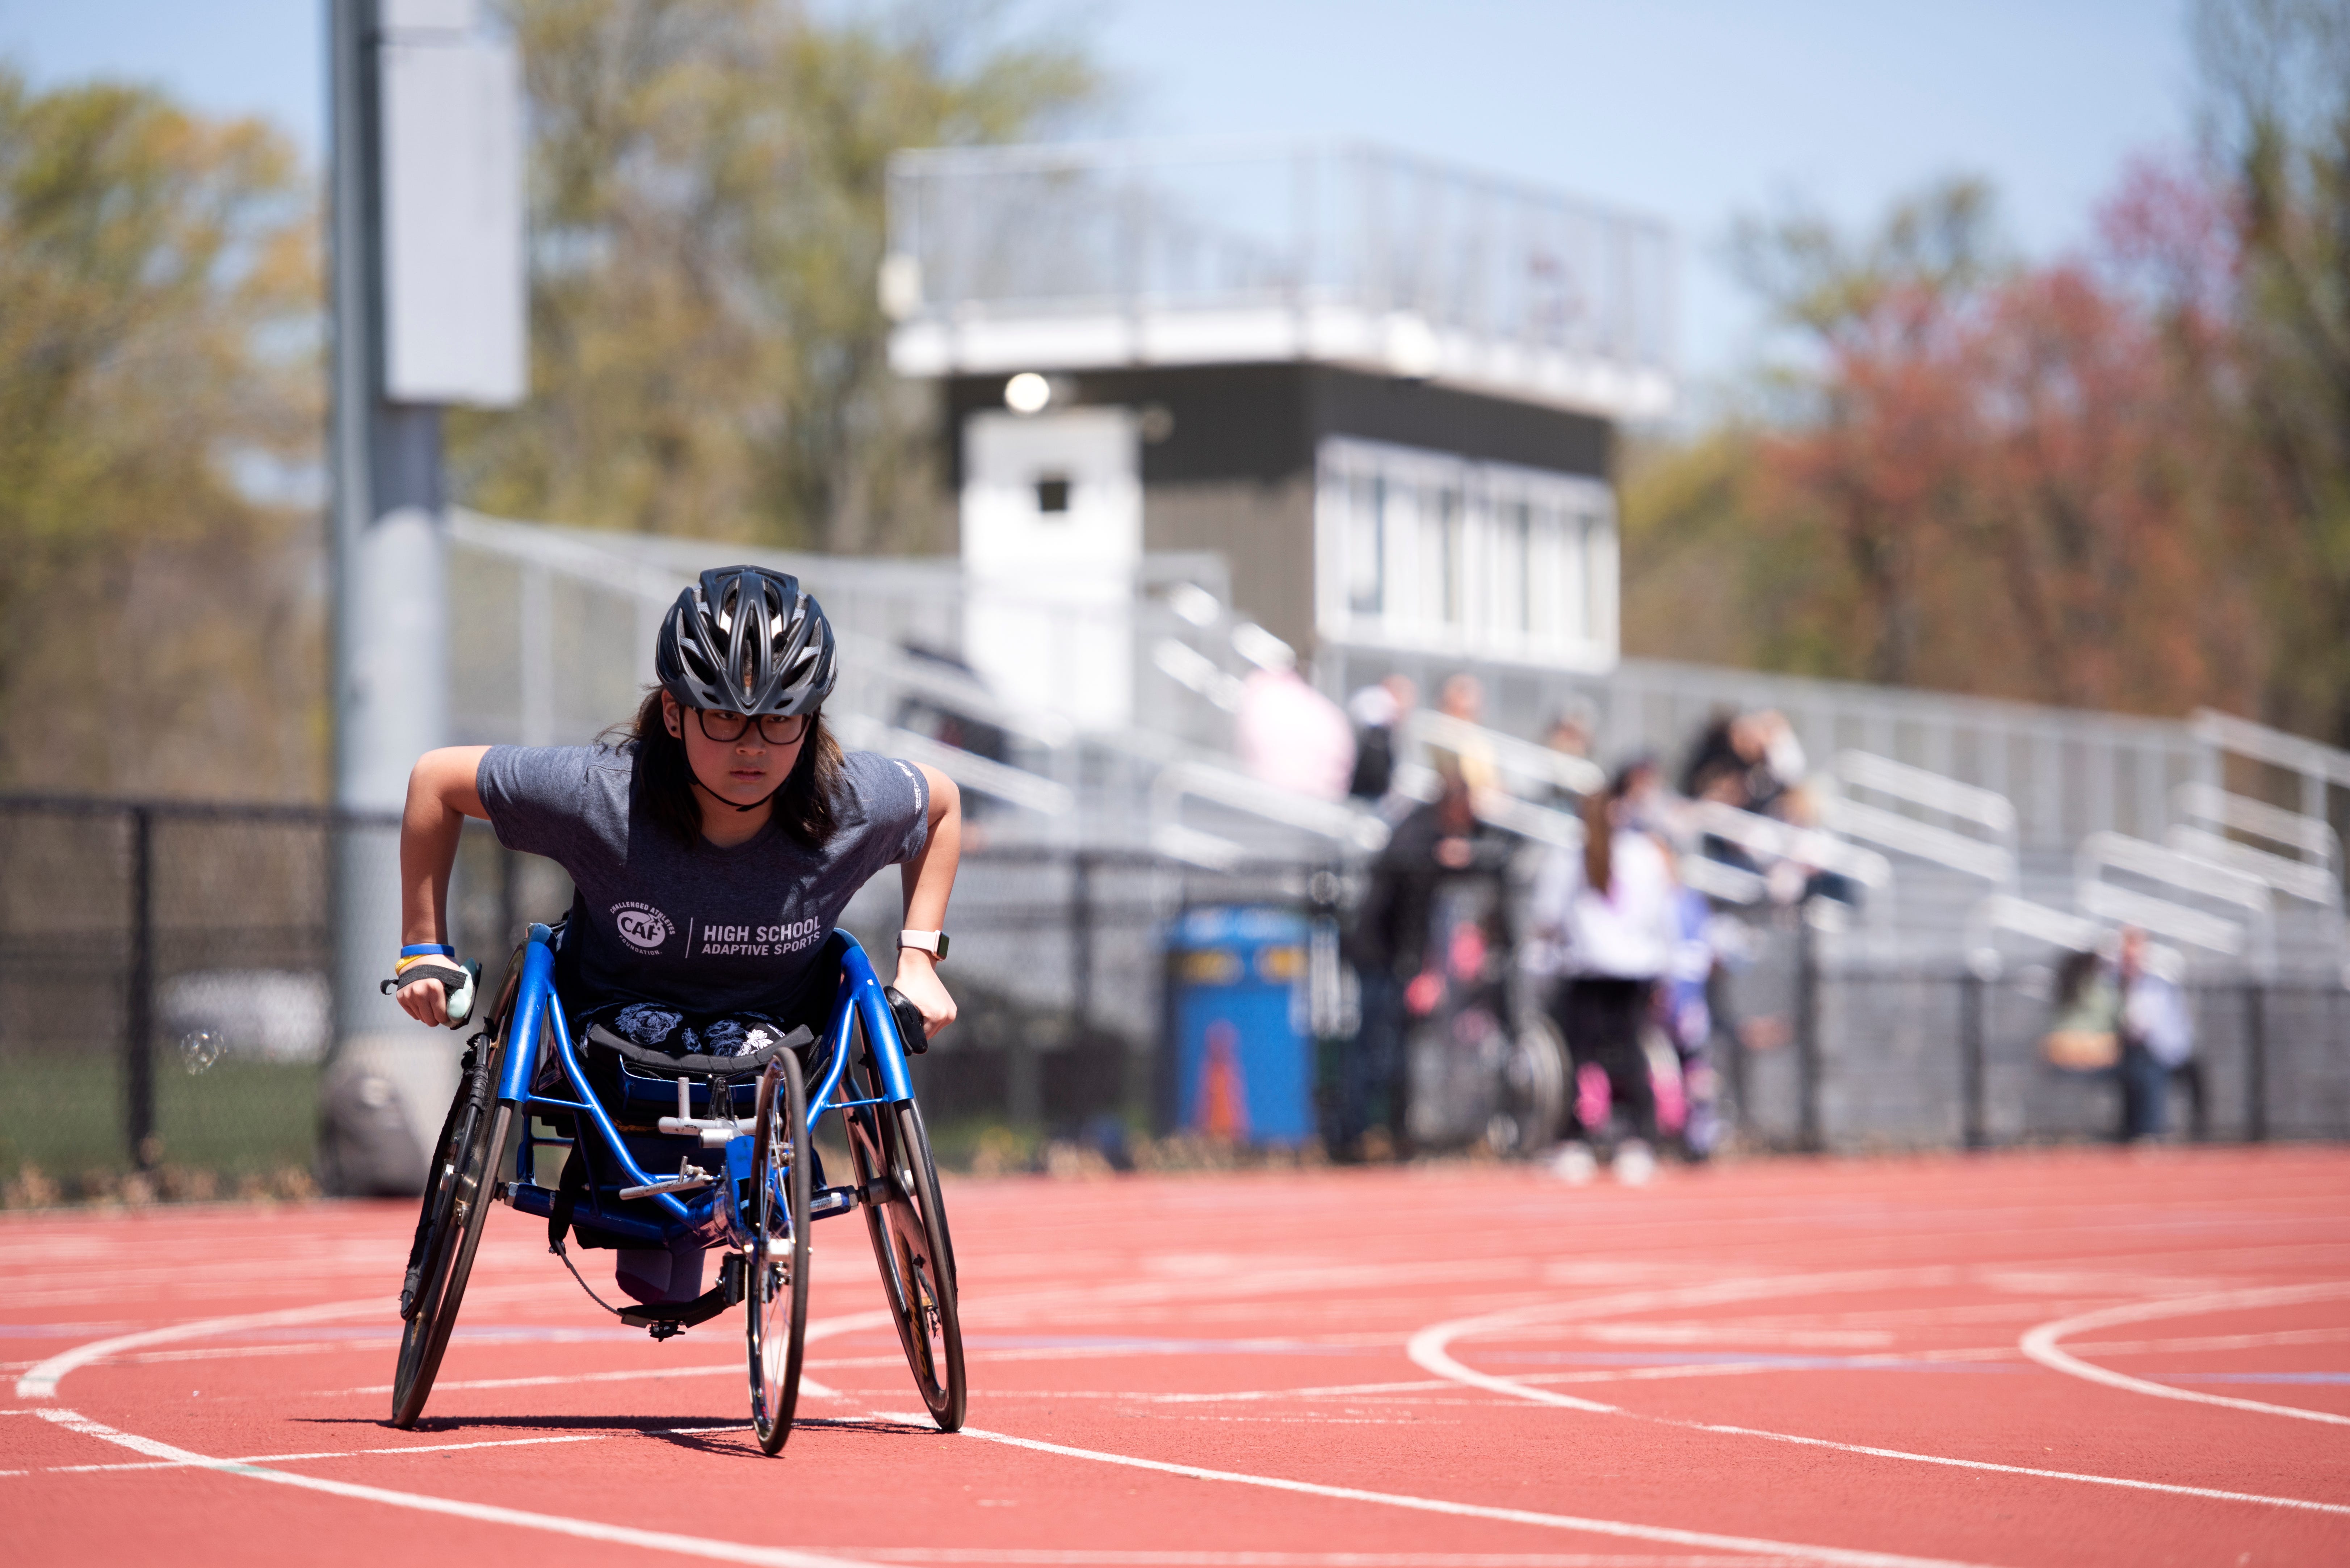 Mia Emory of Sayreville uses a racing wheelchair during a New Jersey Navigators practice on April 30, 2022 at Rahway River Park.